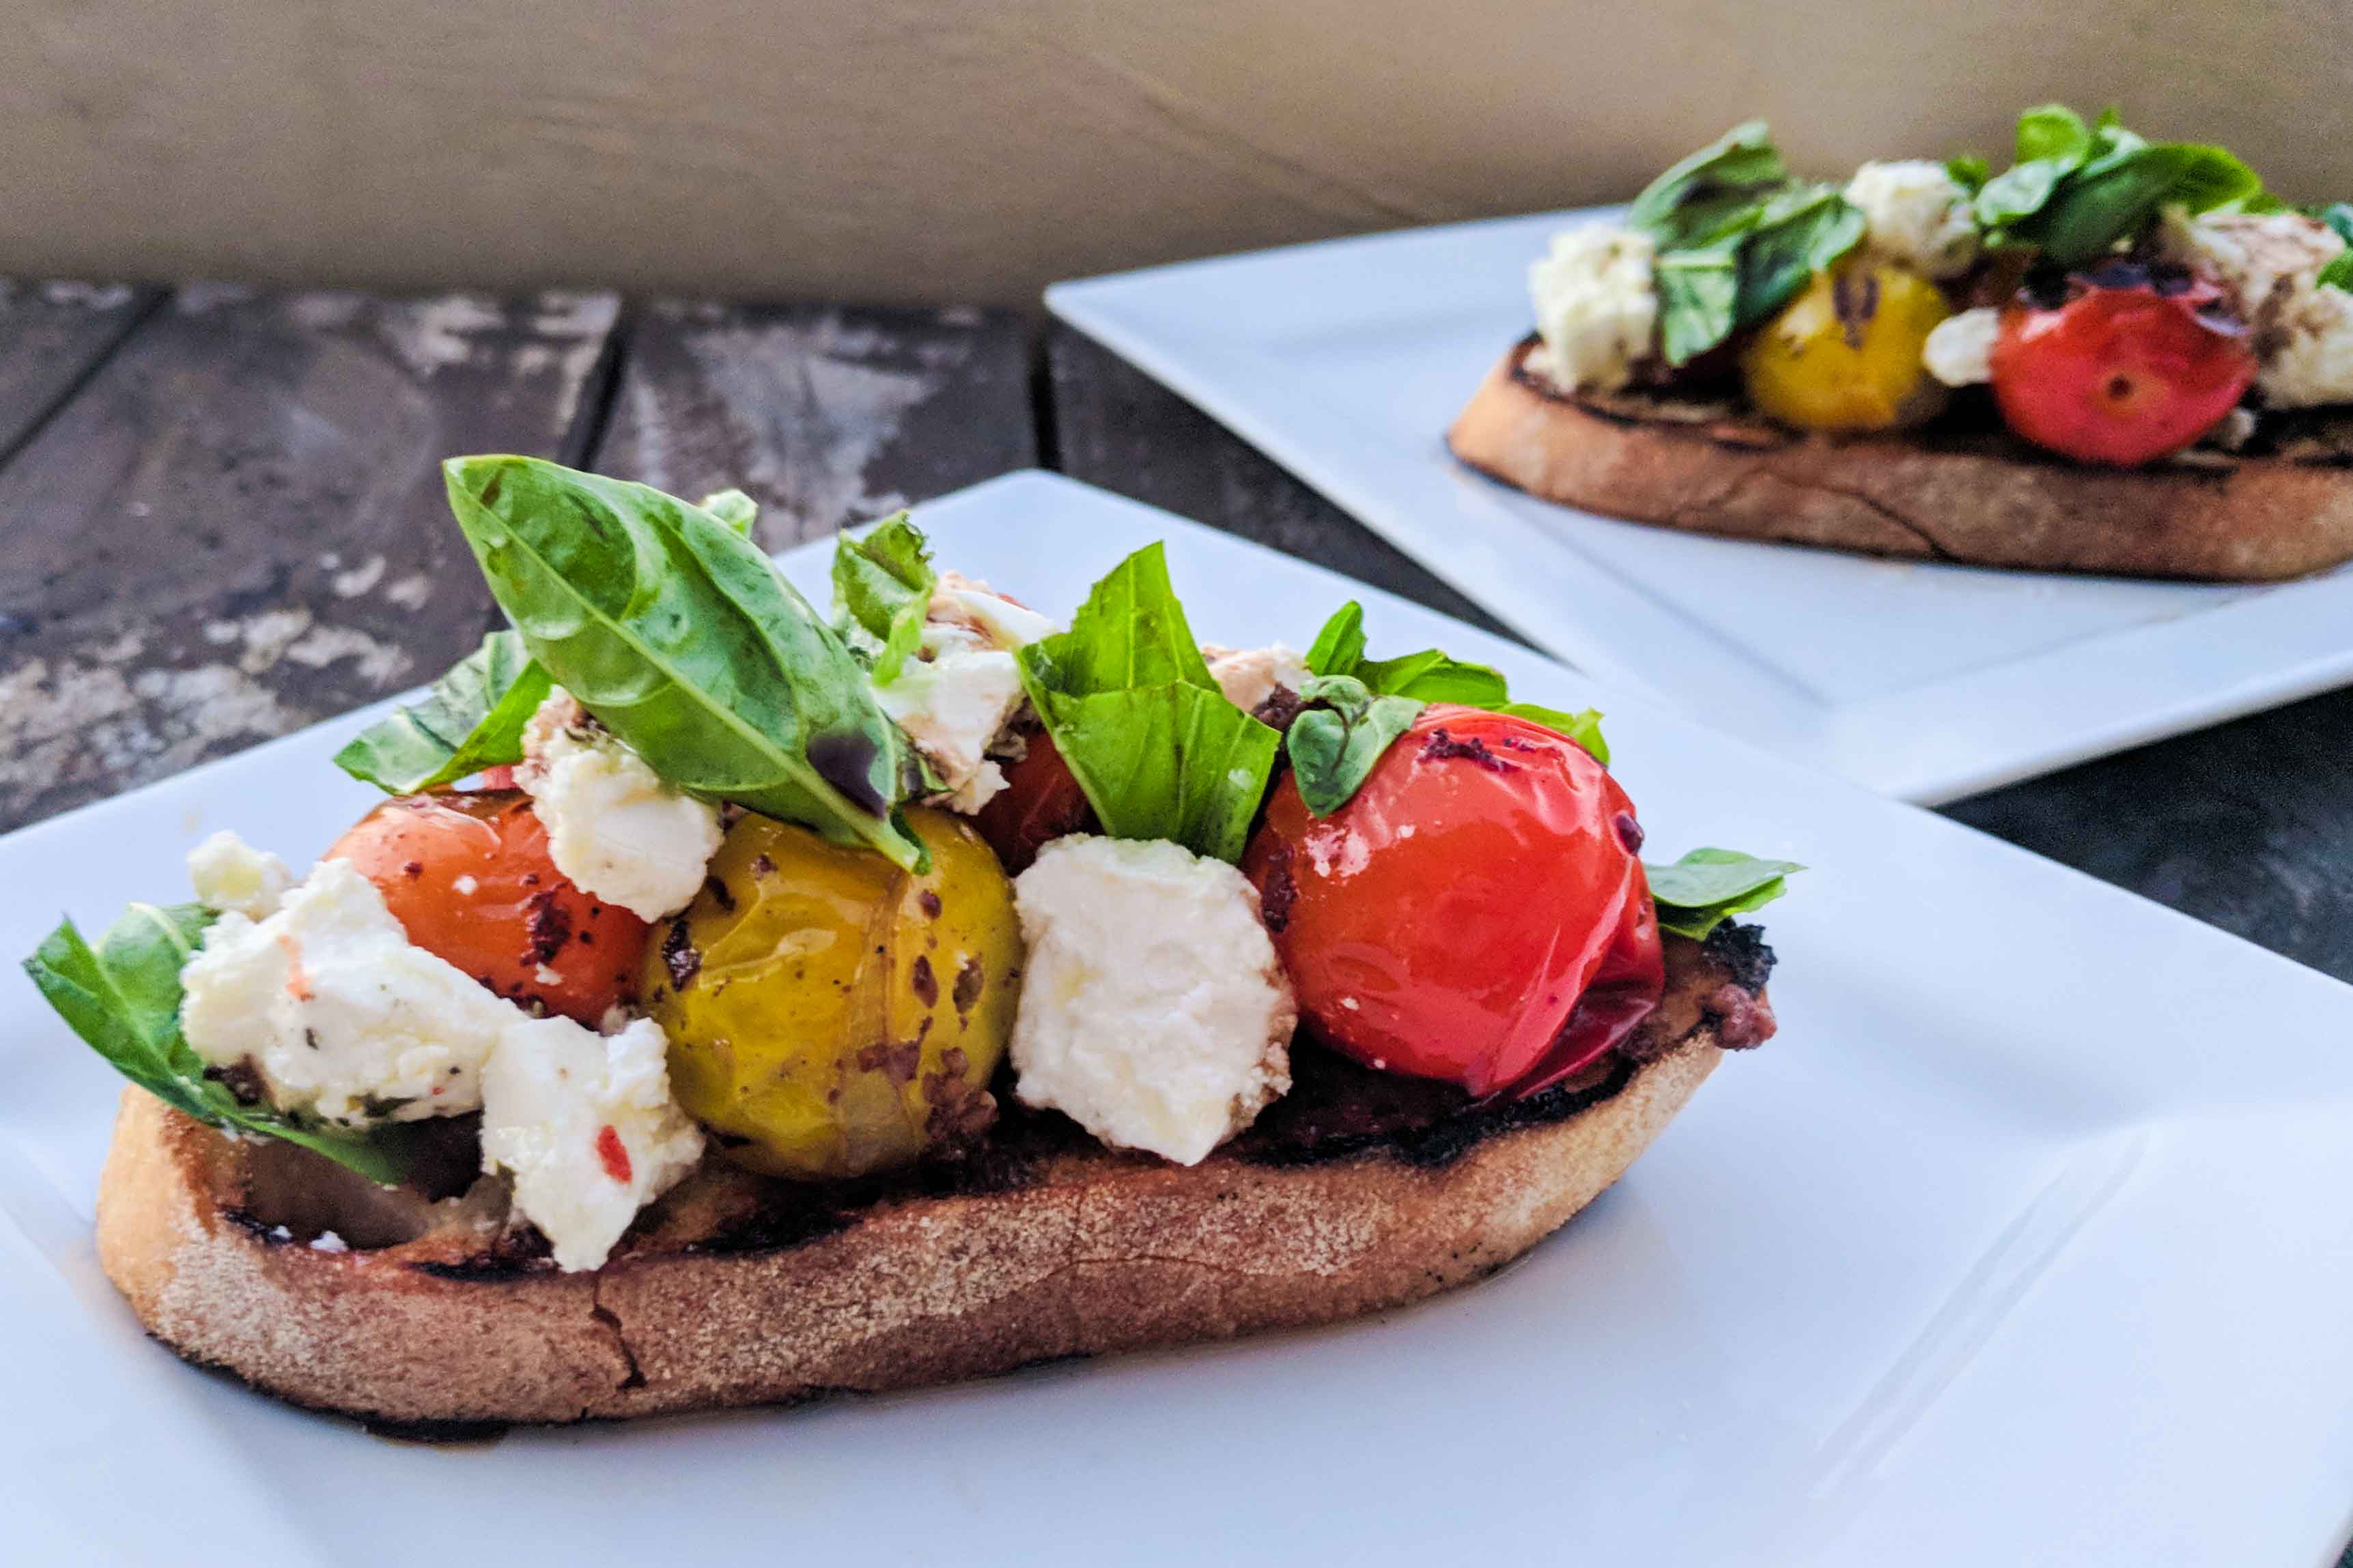 Barbecued heirloom tomato bruschetta with feta and basil